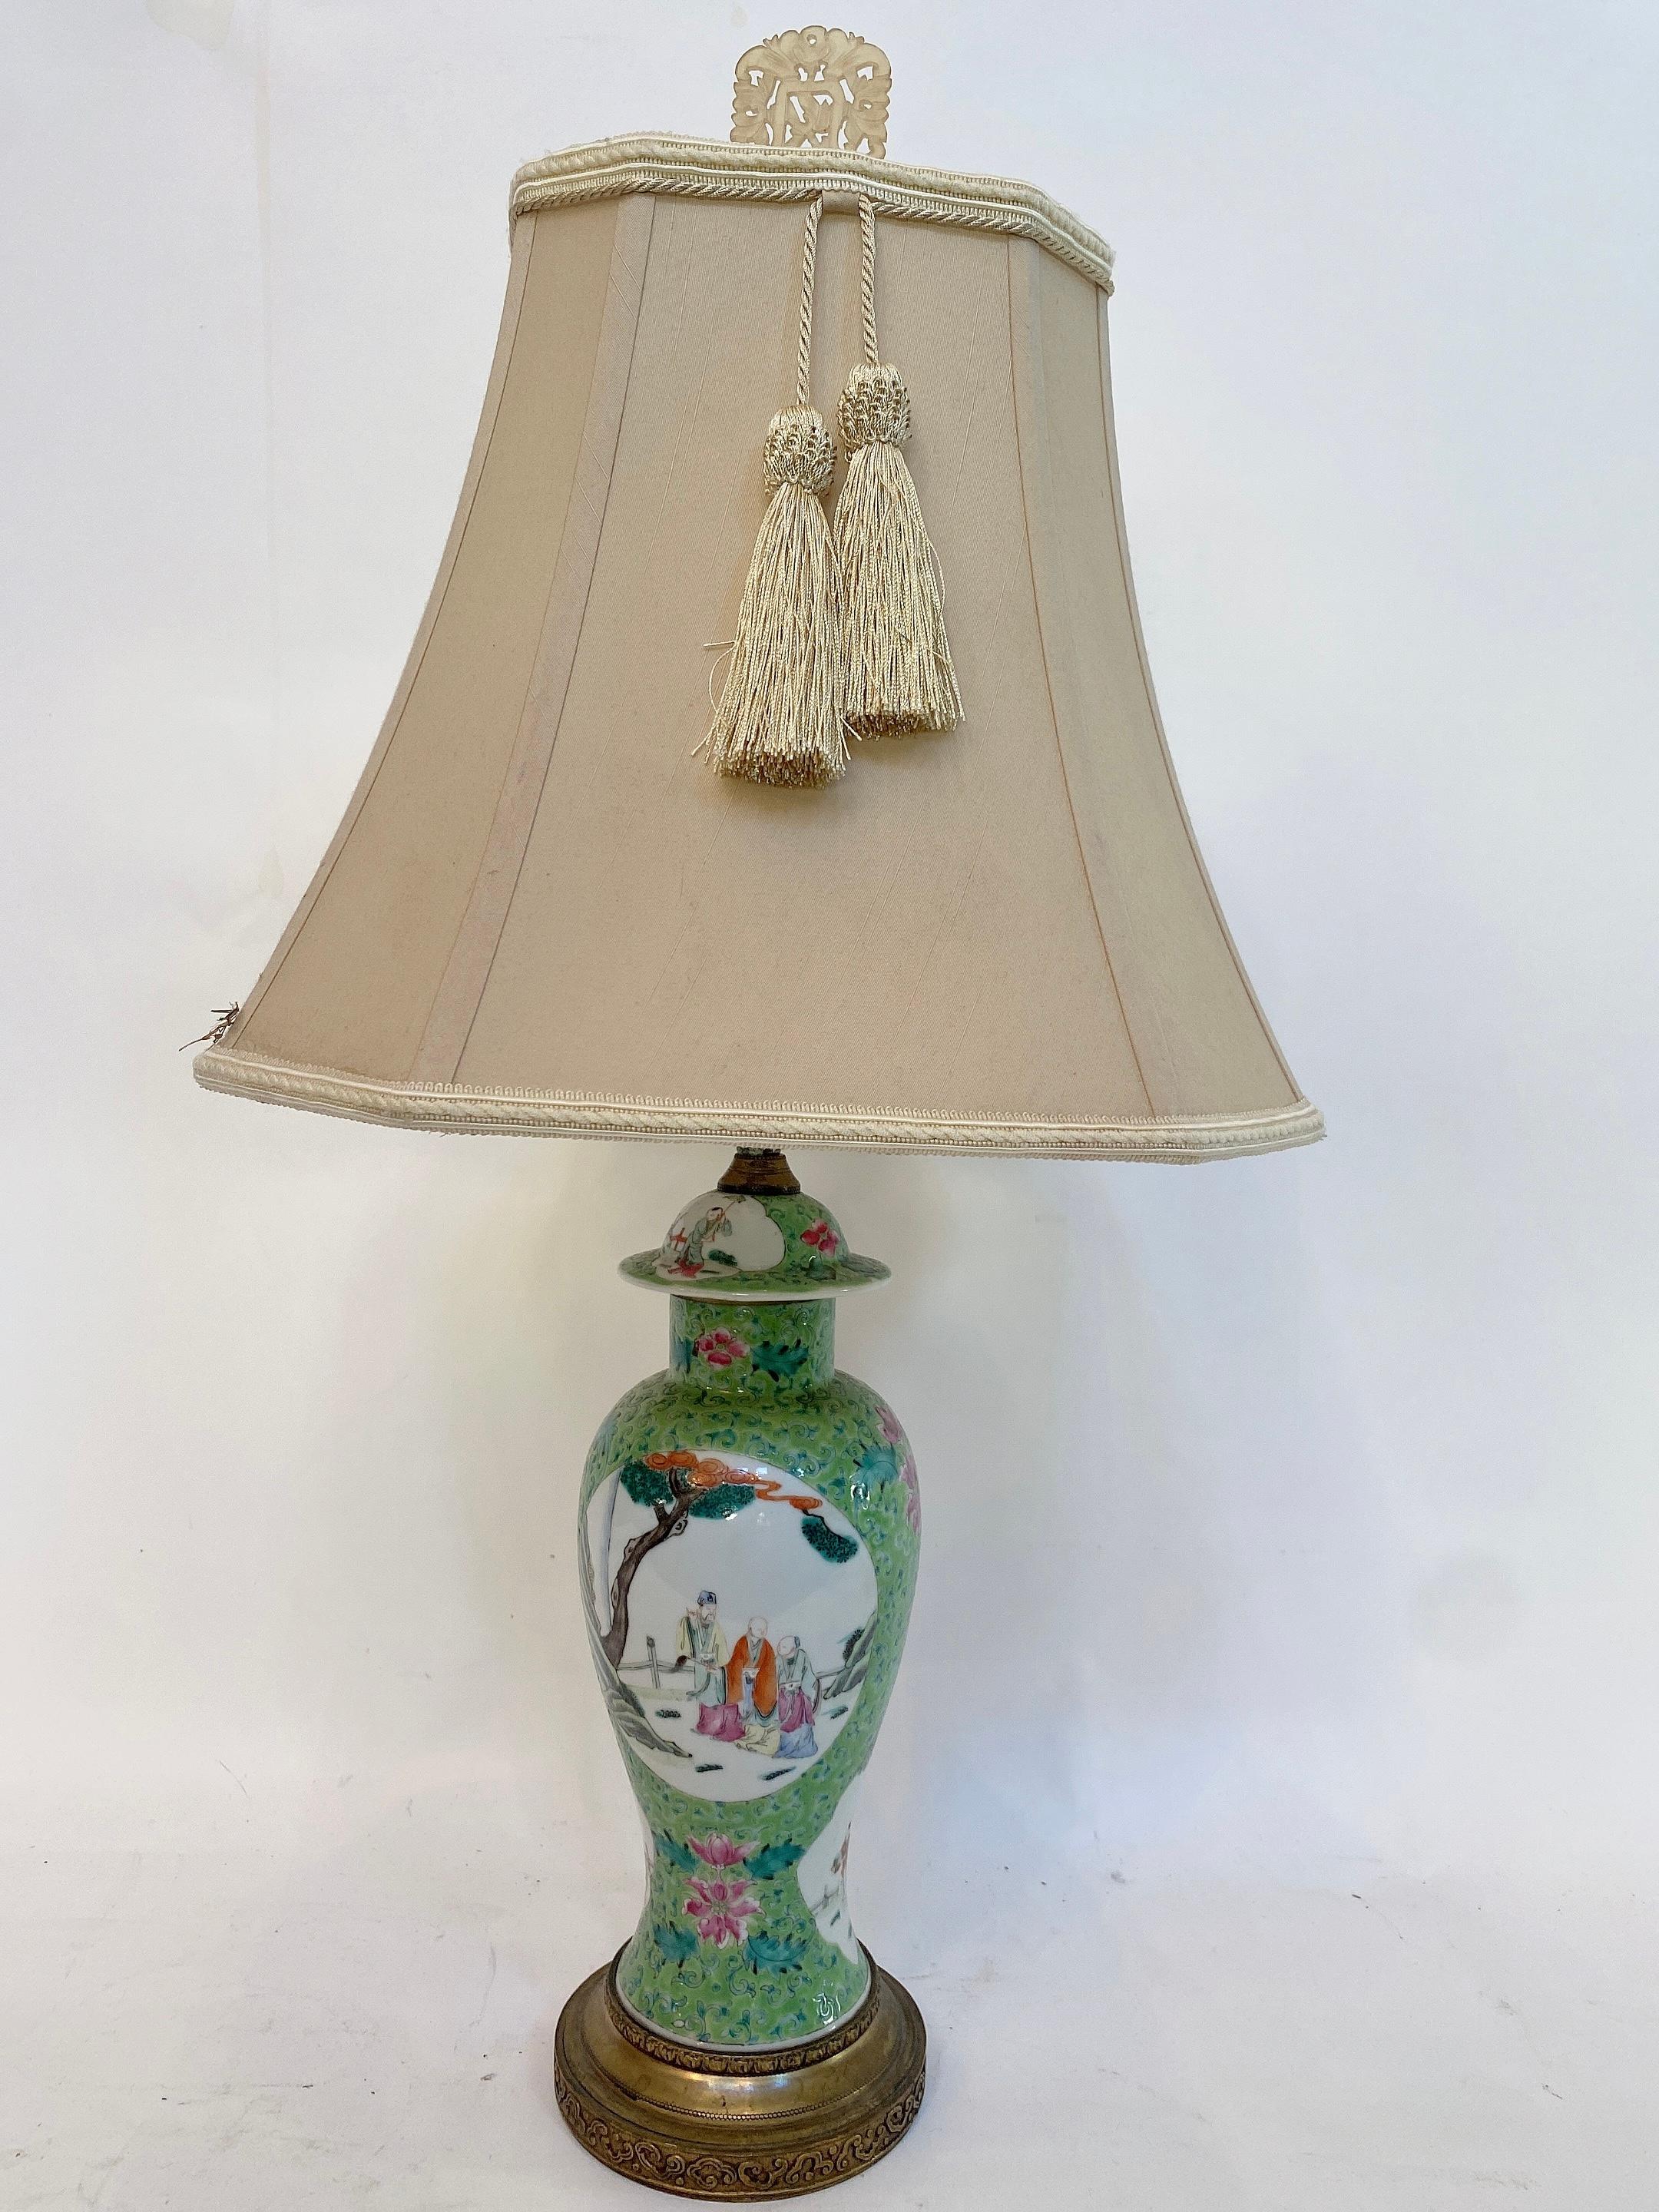 Qing Dynasty a Antique Chinese Green Famille Rose Porcelain Vase Lamp For Sale 8